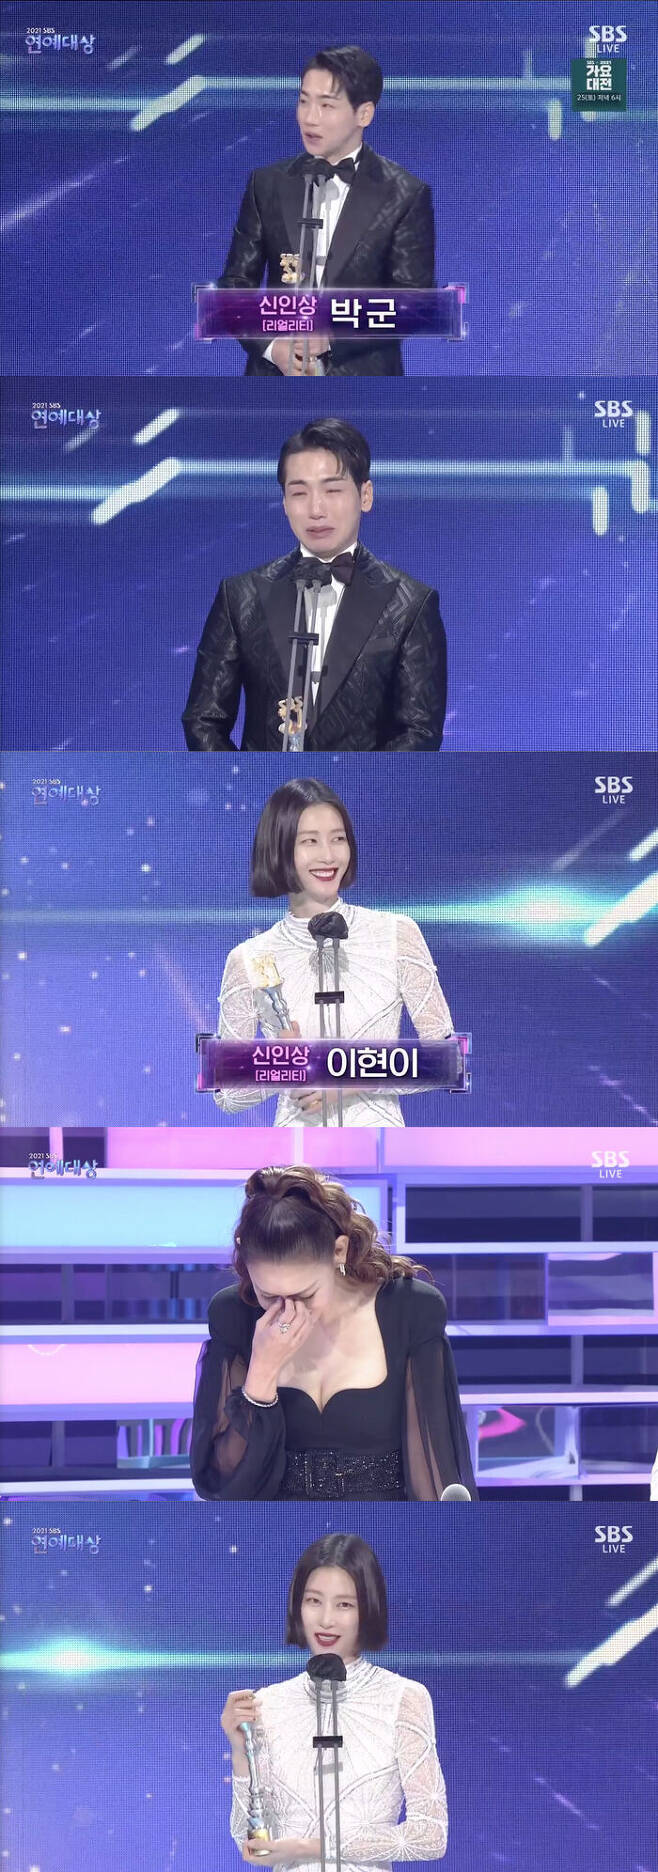 Park Gun and Lee Hyun-yi won the reality part Rookie Award.On the 18th, SBS Prism Tower in Sangam-dong, Mapo-gu, Seoul, won the Rookie Award for the newcomers who played an active role in SBS entertainment this year at the 2021 SBS Entertainment Grand PrizeThe reality category Rookie Award was won by Park Gun and Lee Hyun-yi.Park Gun, who played an active role in Ugly Our Little, said, I am born and come for the first time.I think I watched the awards ceremony on TV last year, but now I am standing here and I can not believe it. He then thanked the staff and colleagues he had joined, and he said, I spent 15 years as a special warrior to perform, and I have been running since then.It was always like an exhibition situation for me who did not know whether this road would be a flower road or a thorny field. Park Gun thanked the fans and attracted attention to the Ministry of National Defense and the Special Forces.He also conveyed his heart to his aunts, who care for him, and his mother, who was watching from the sky. Park Gun said, I won my mothers son.I love my mother so much, he said, making the eyes of those who convey their heartfelt feelings about her mother red.Lee Hyun-yi, who played in Same Bed, Different Dreams 2: You Are My Dest, Bloody Girl and Kokkomu, said that 2021 was a very special year for me.I have been living fiercely for the first time in my life, and I have been sincere every time, but I feel like I have spent a year without regret, he said.He also thanked the staff of the program he was appearing on.Lee Hyun-yi said, I am so grateful to Han Hye-jin for making the spirit of the old field, which made the first time of the old field.And MC Han Hye-jin, who saw it, also caught the eye with a tearful eye.Finally, Lee Hyun-yi gave a special heart to his family and husband who always supported and supported him.And he said, I will be a broadcaster who will continue to do my best.On the other hand, the show - Sports Rookie Award was honored by Keum Sae-rok for Lee Seung-yeop and Variety Rookie Award of Comfortable and Gongchiri.